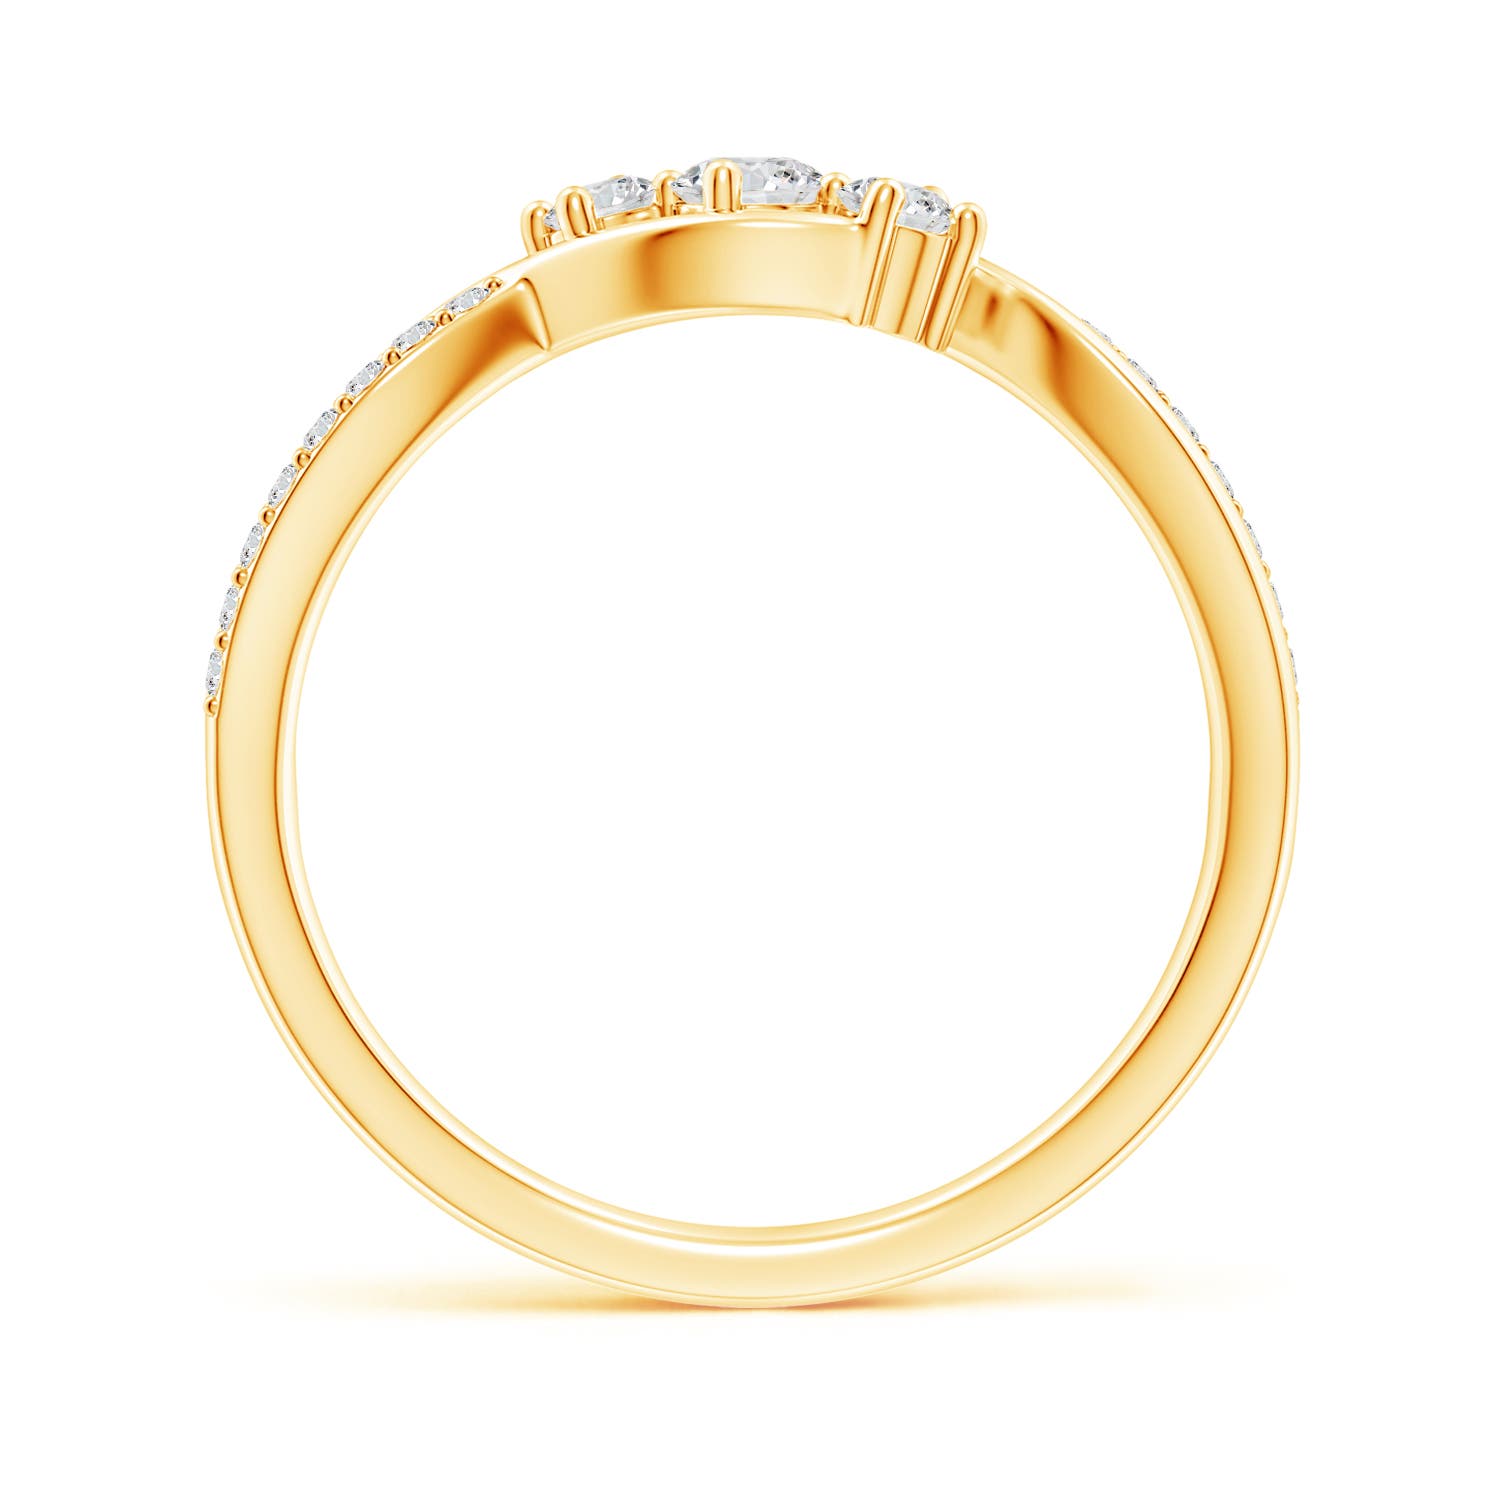 H, SI2 / 0.48 CT / 14 KT Yellow Gold